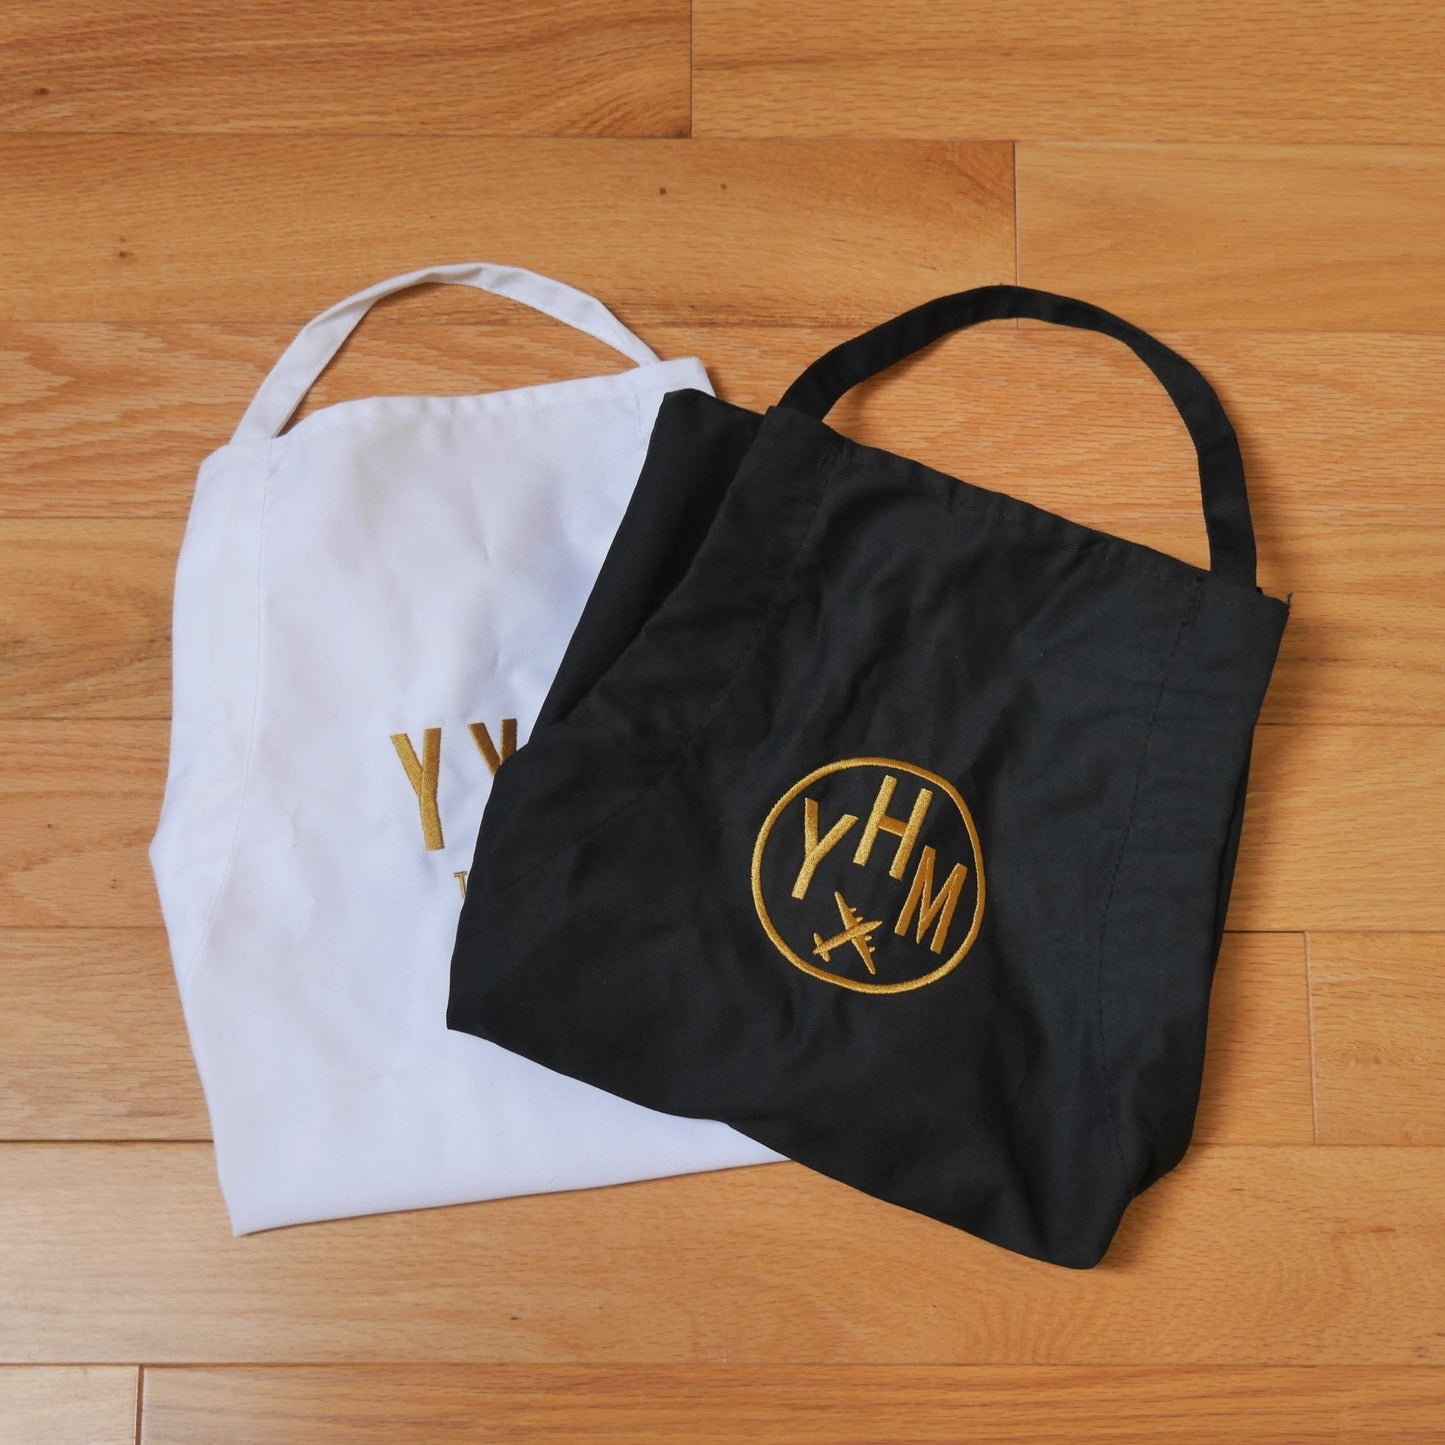 City Embroidered Apron - Old Gold • YQM Moncton • YHM Designs - Image 14